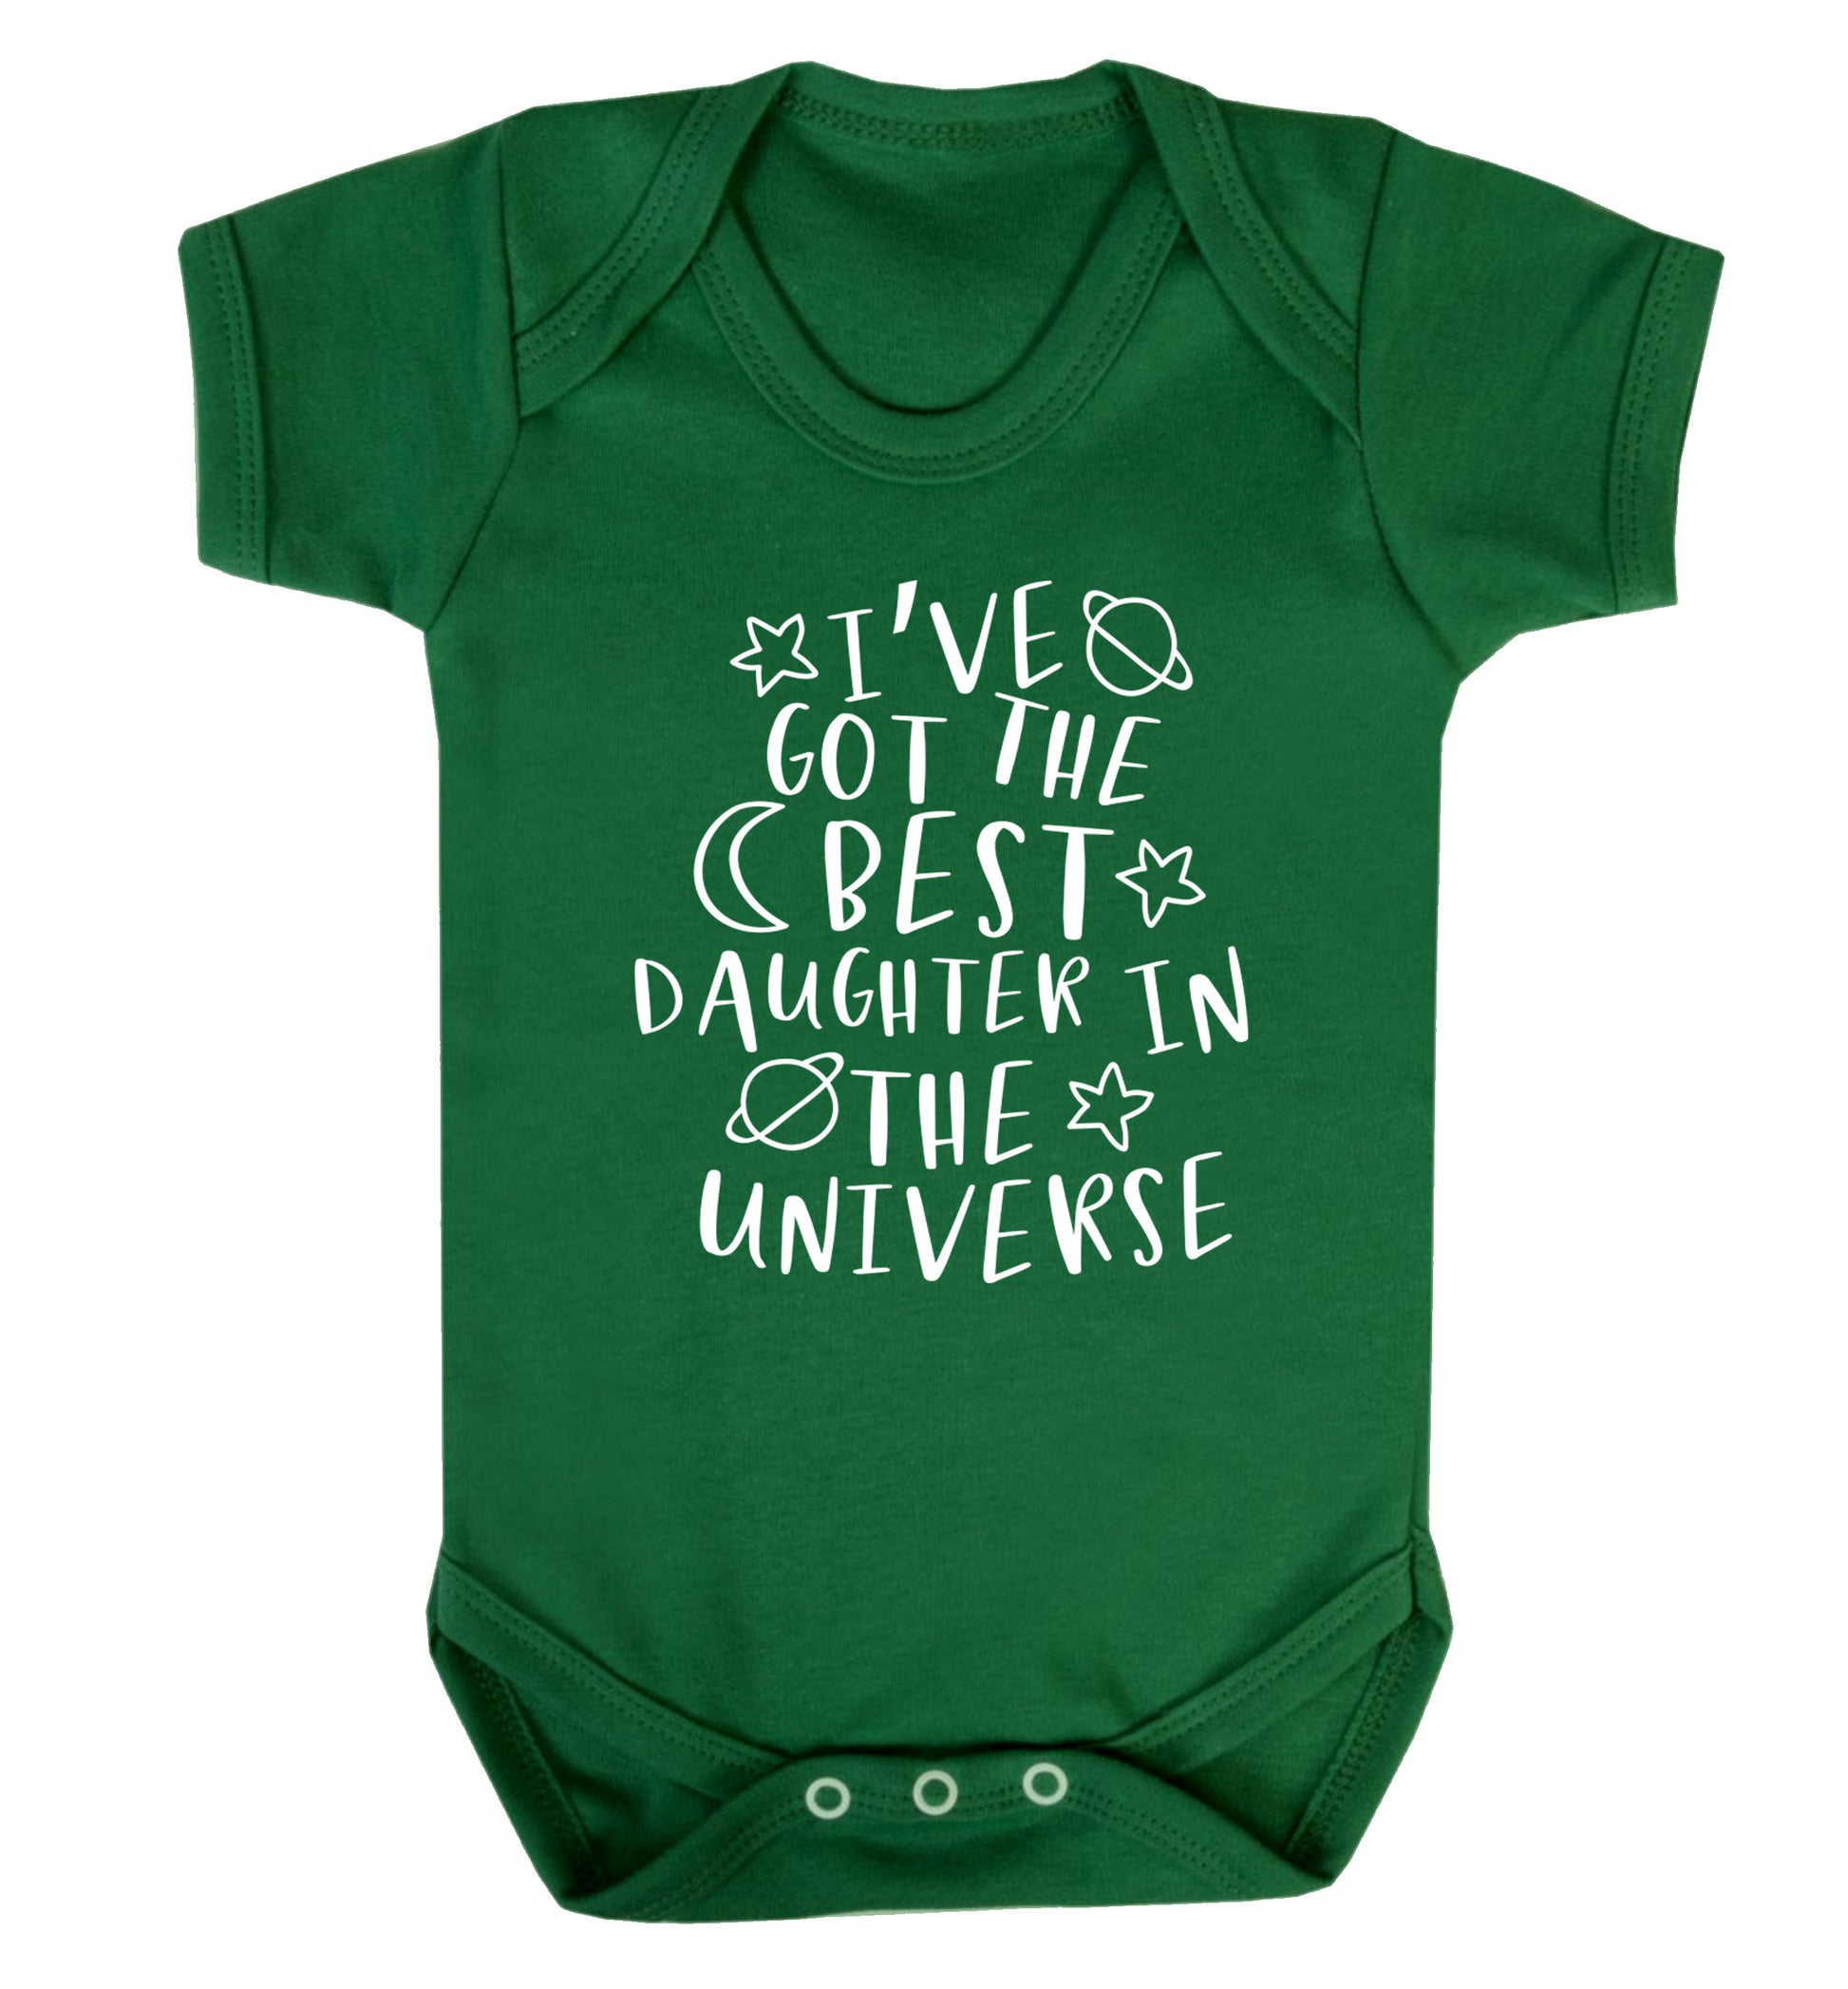 I've got the best daughter in the universe Baby Vest green 18-24 months